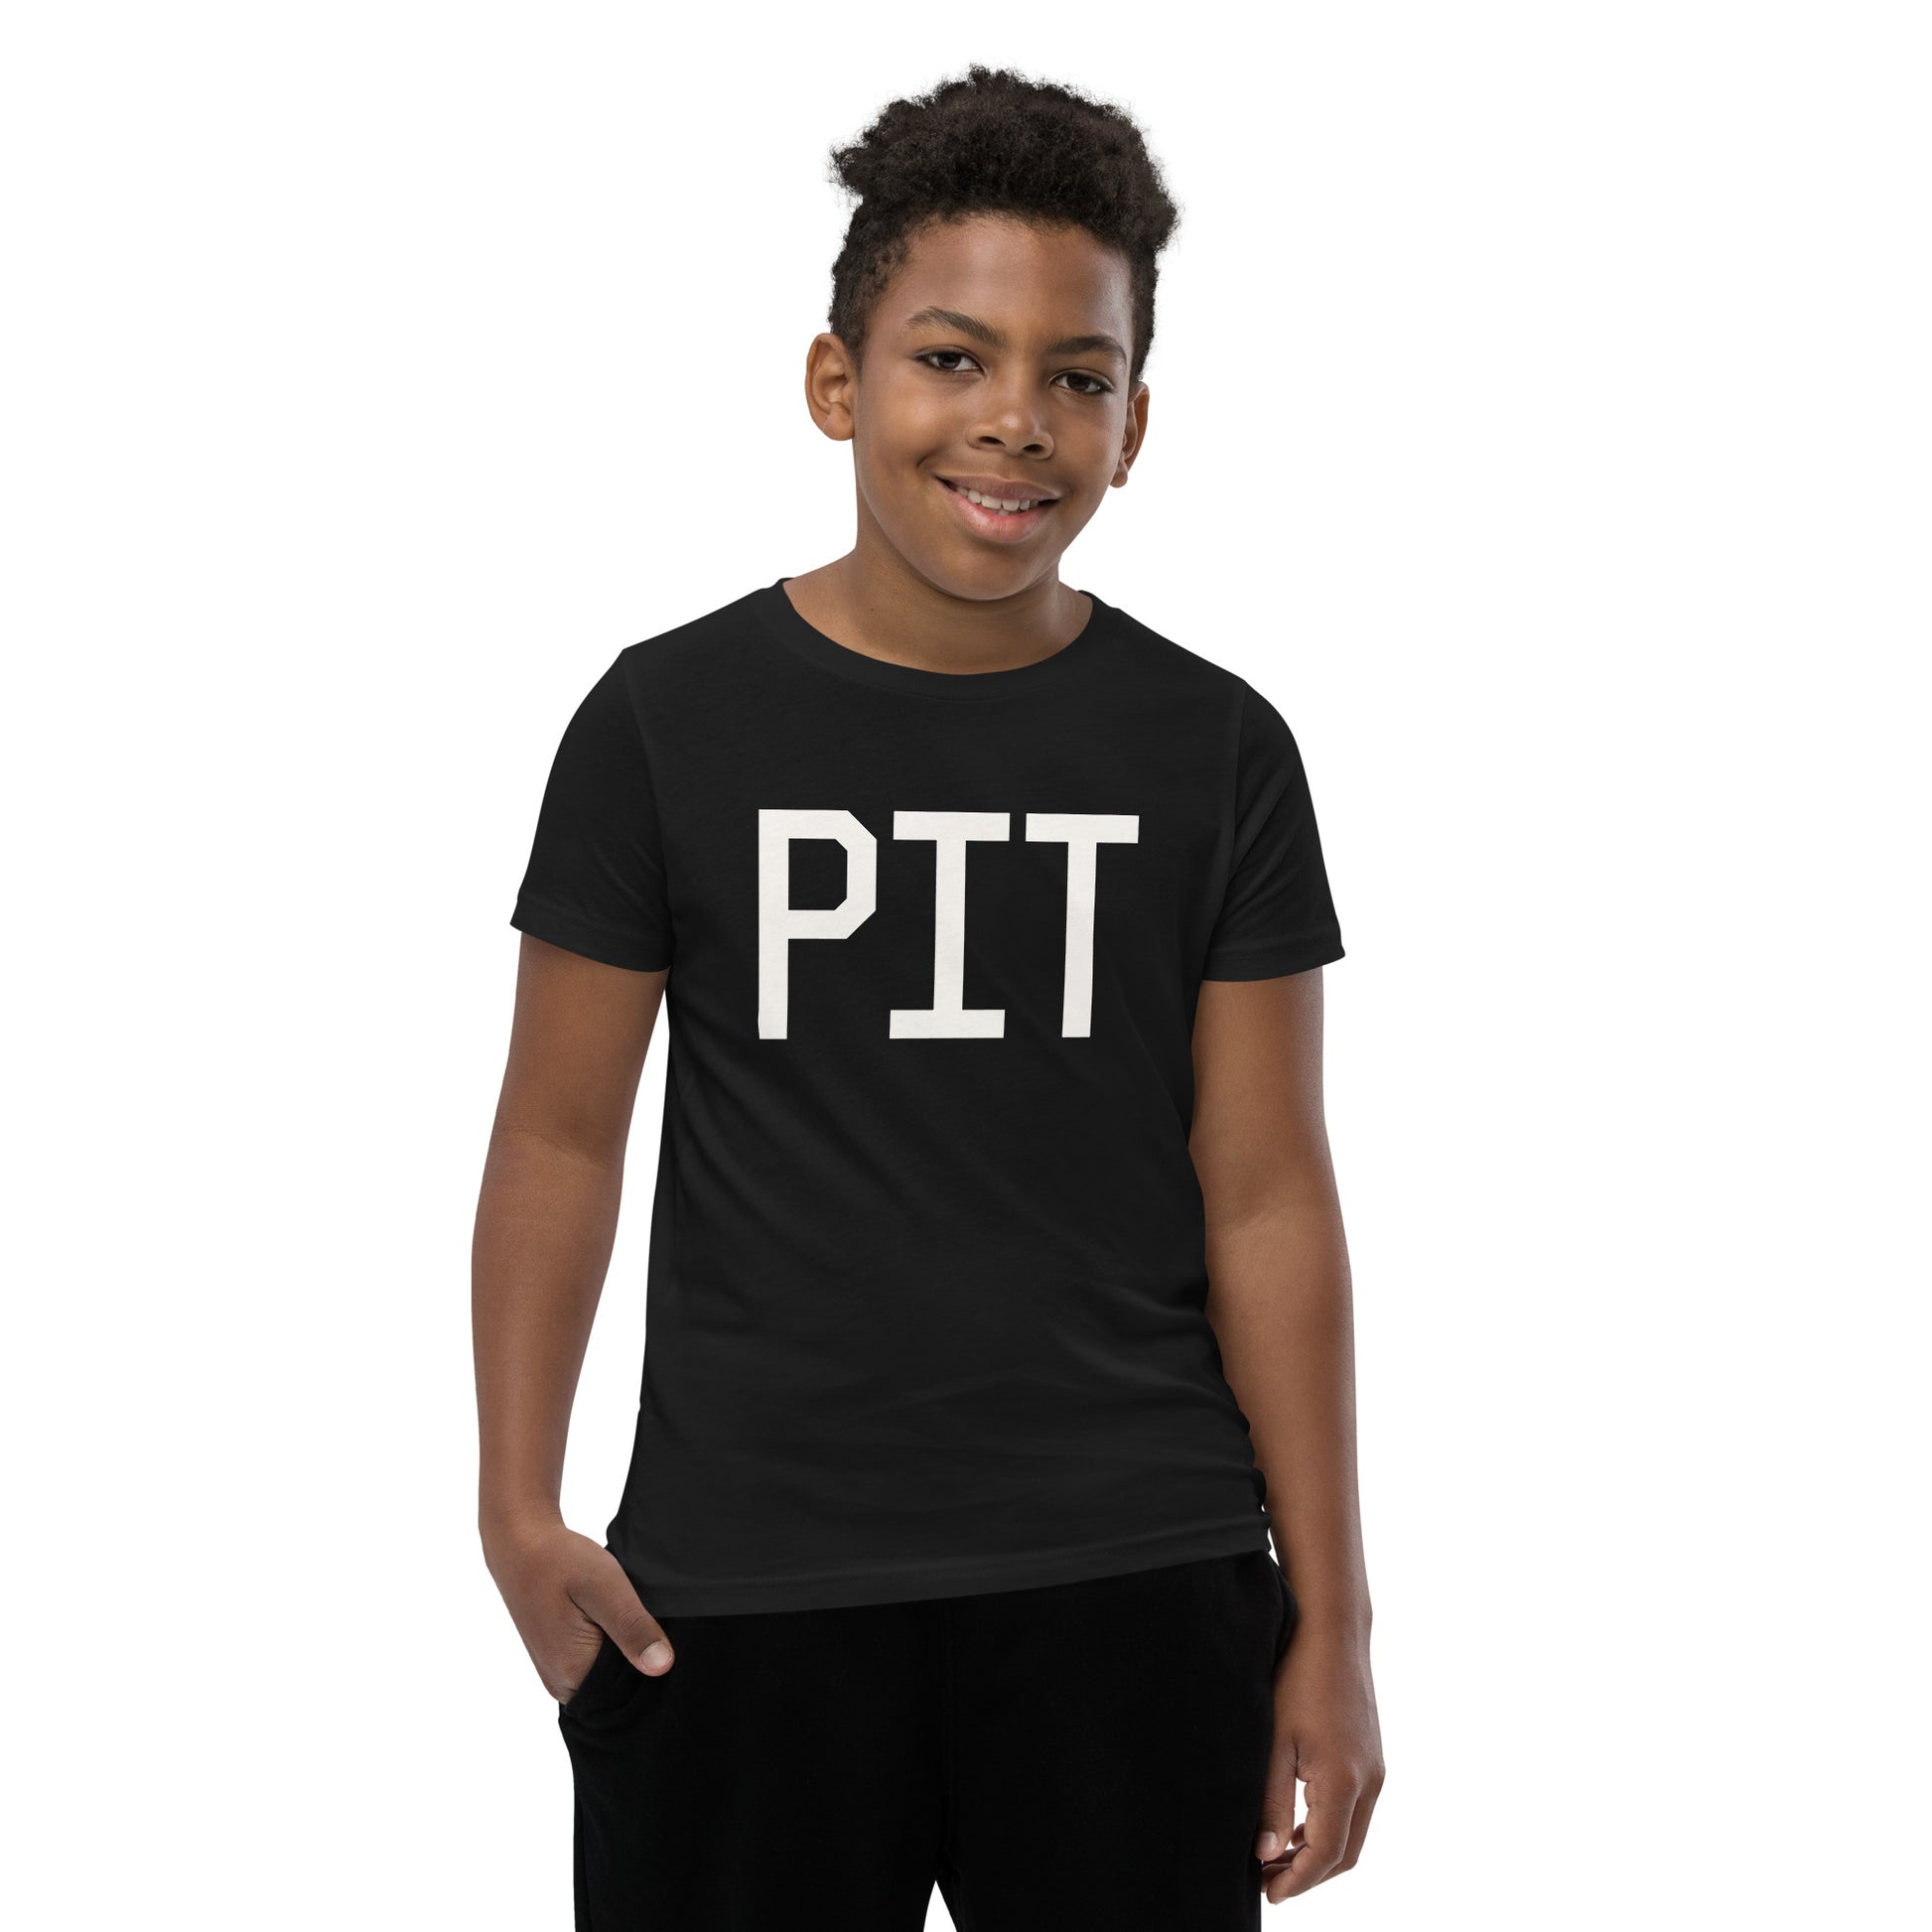 Kid's T-Shirt - White Graphic • PIT Pittsburgh • YHM Designs - Image 06